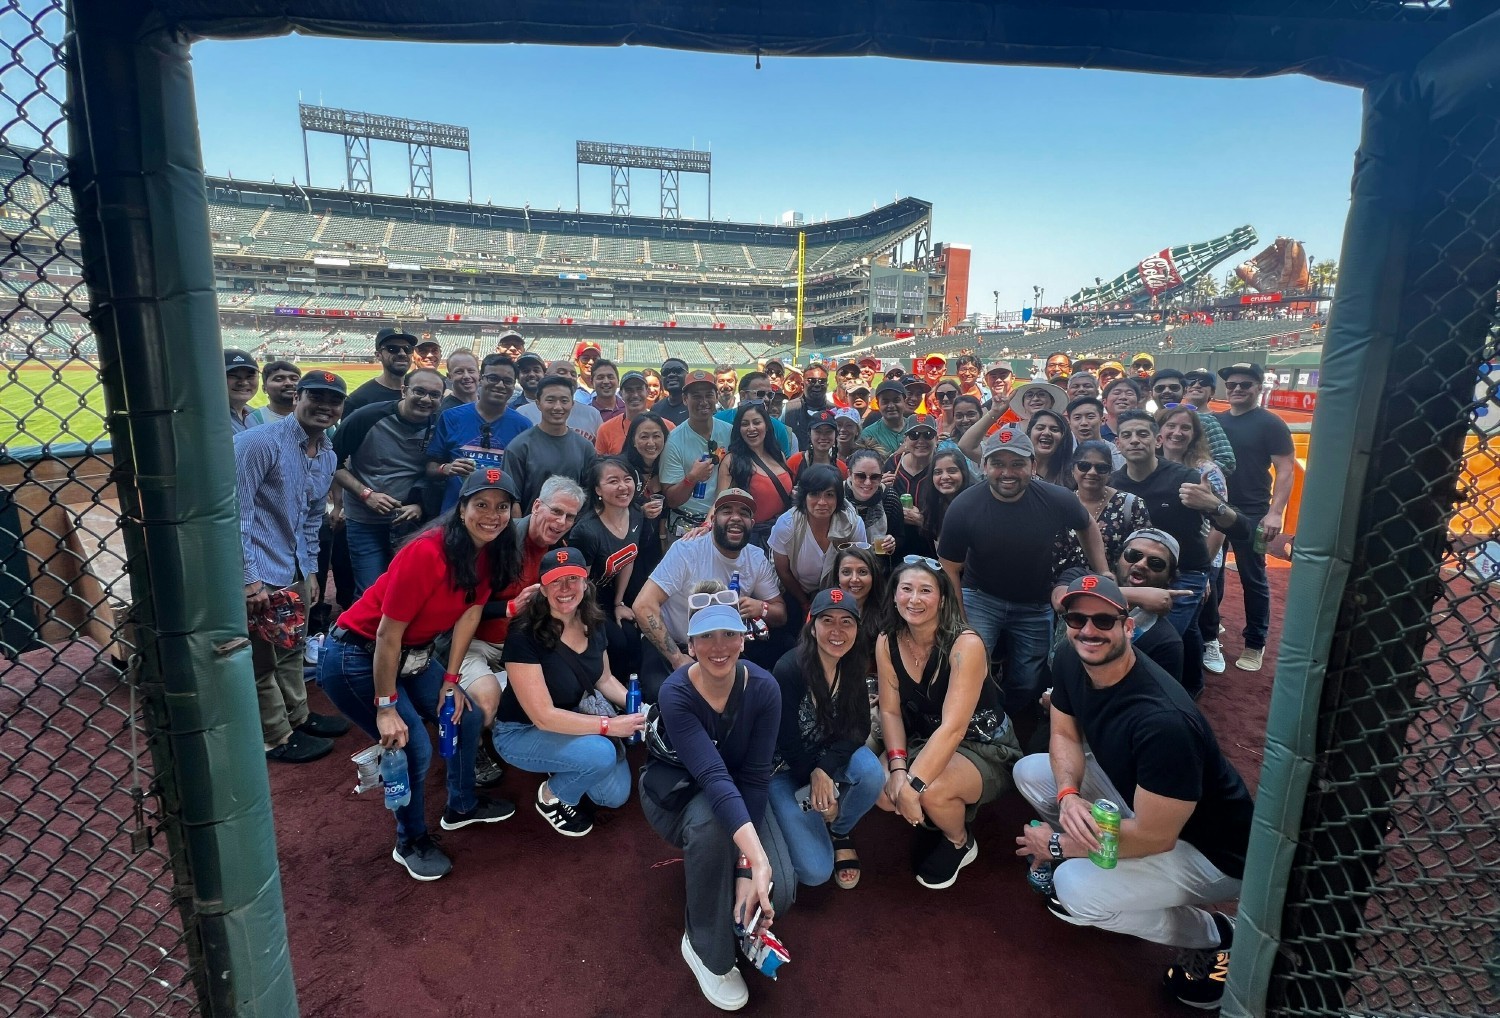 Redwood City office summer outing; Giants game!